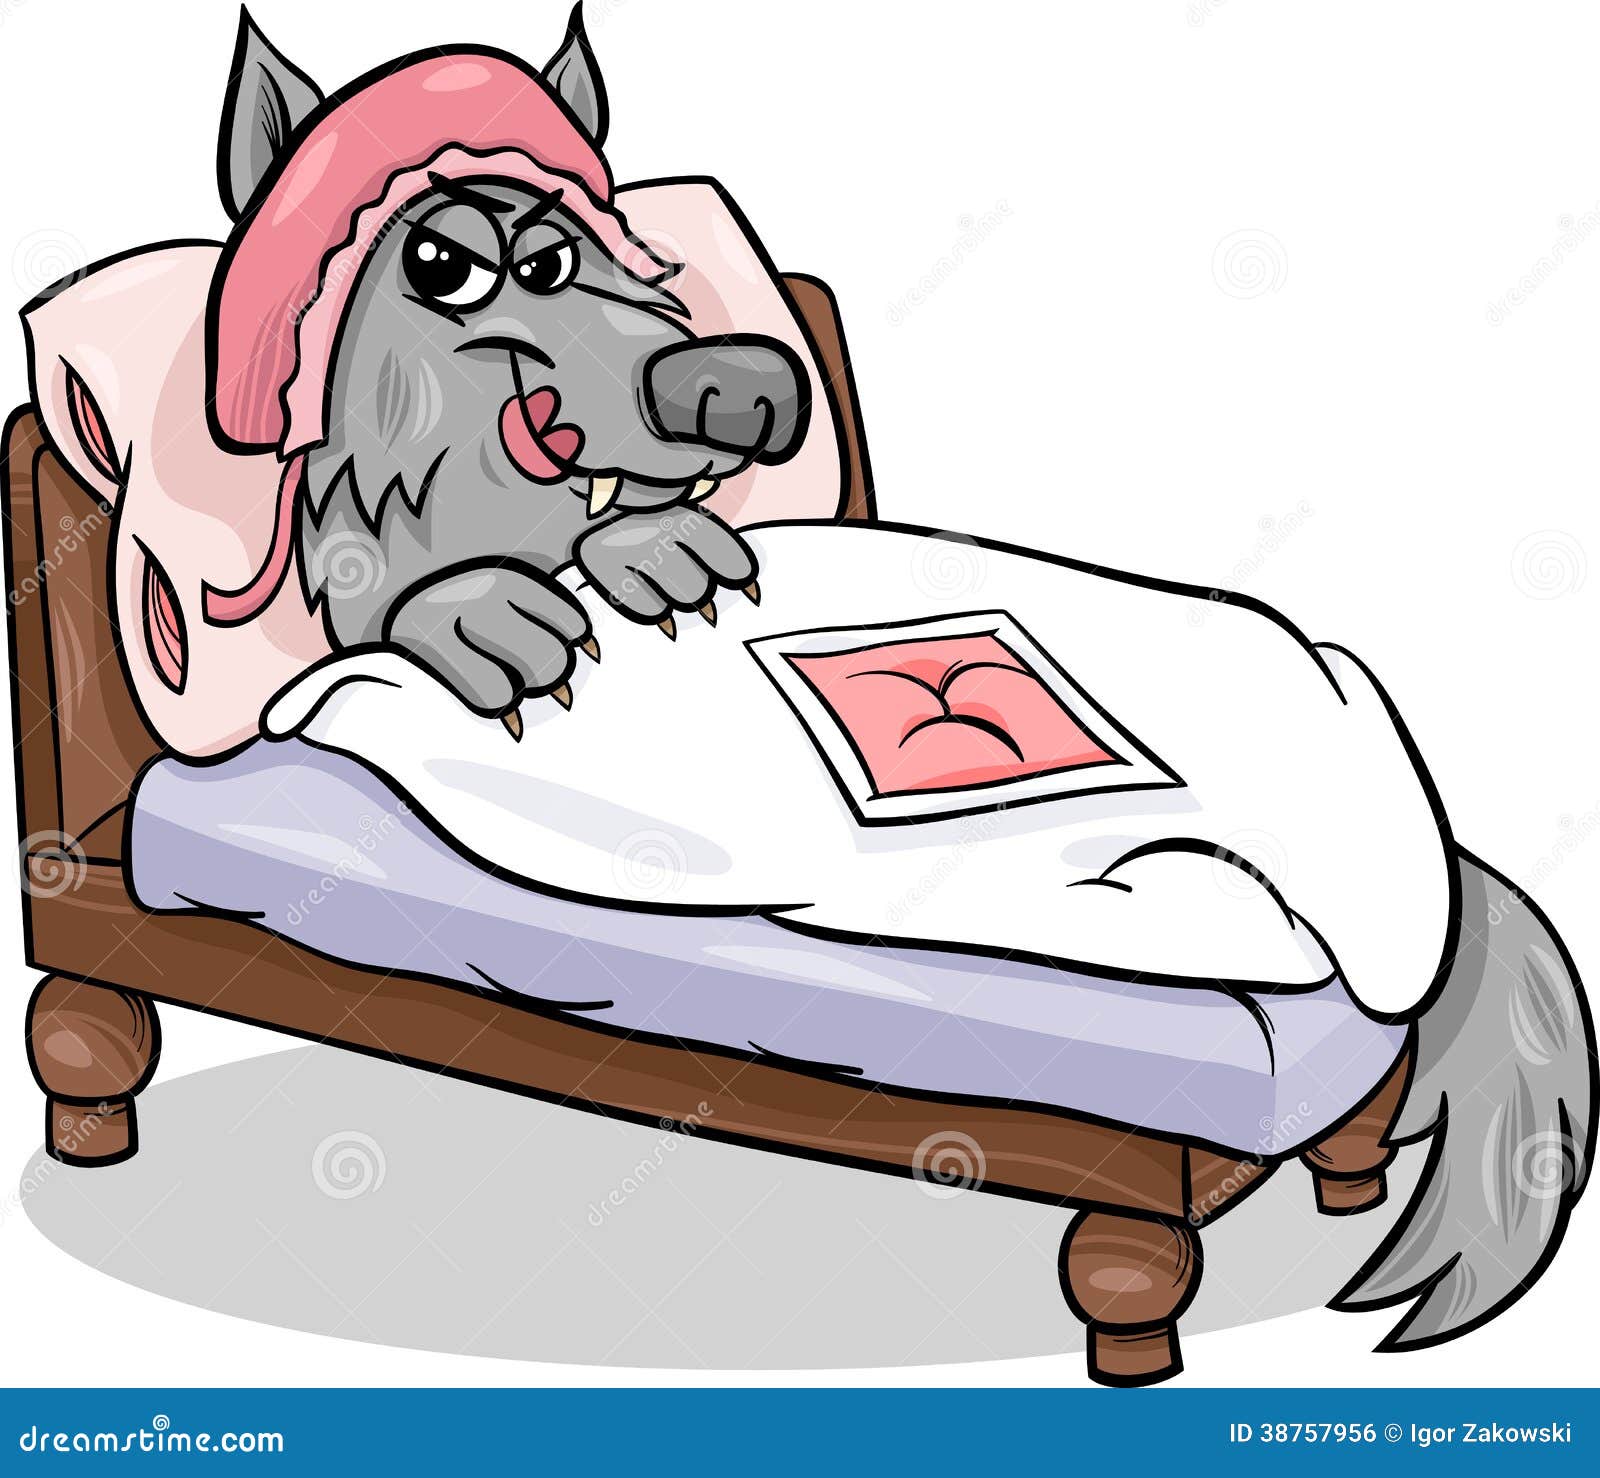 Bad Wolf In Bed Cartoon Illustration Royalty Free Stock Image - Image ...